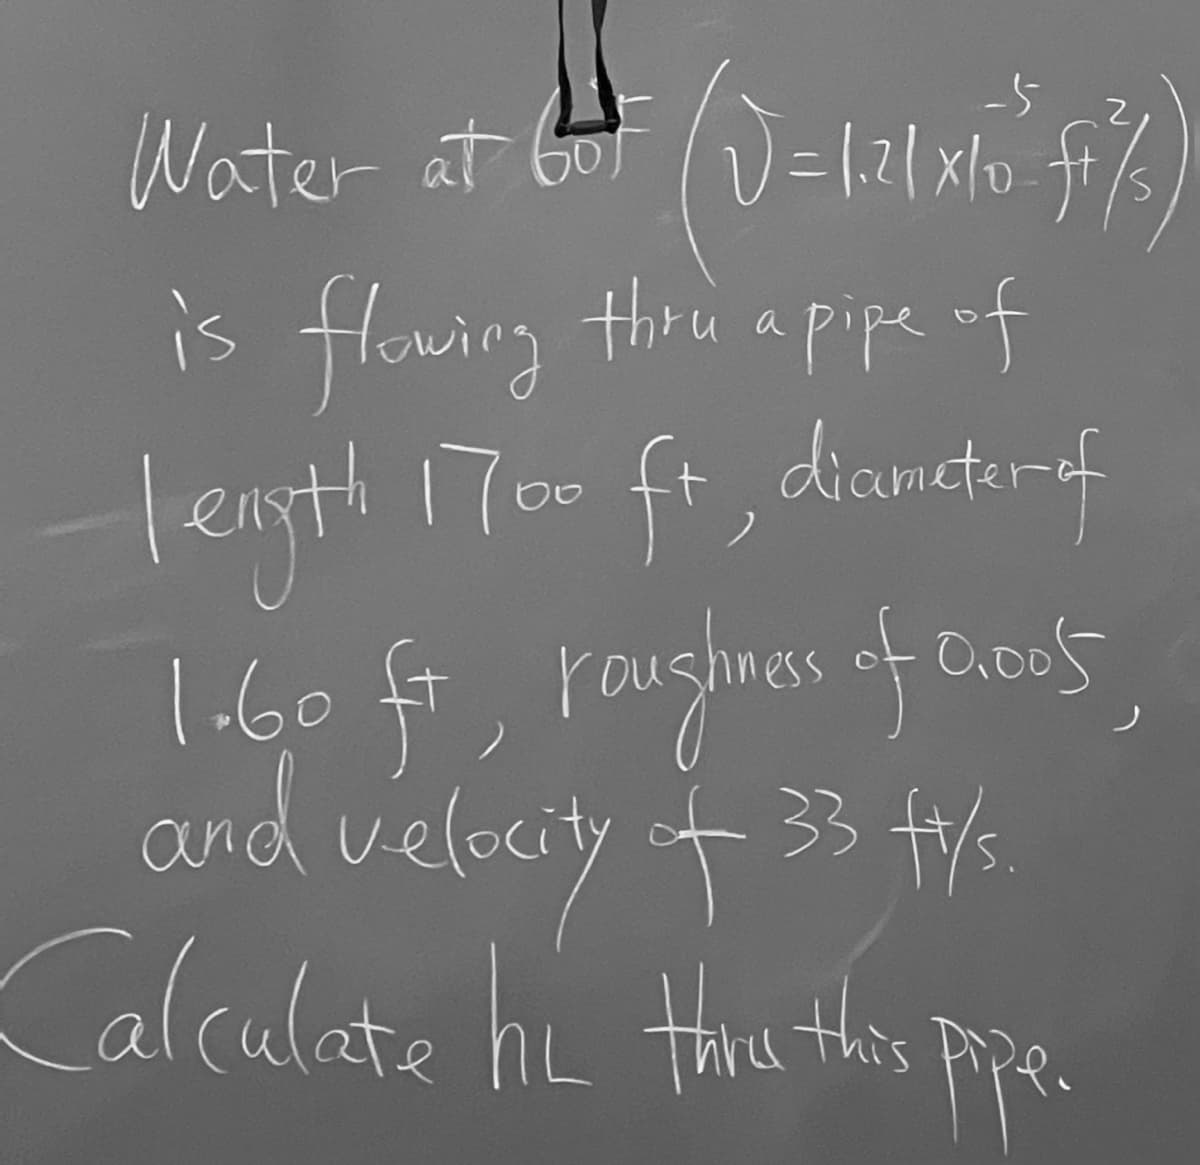 -1.21x/0-ft
Water at + (0-121x²= ²4%)
is flowing thru a pipe of
length 1700 ft, diameter of
shness
1.60 fi, rougham of tools
and velocity of 33 41/s.
Calculate hi tore this paper